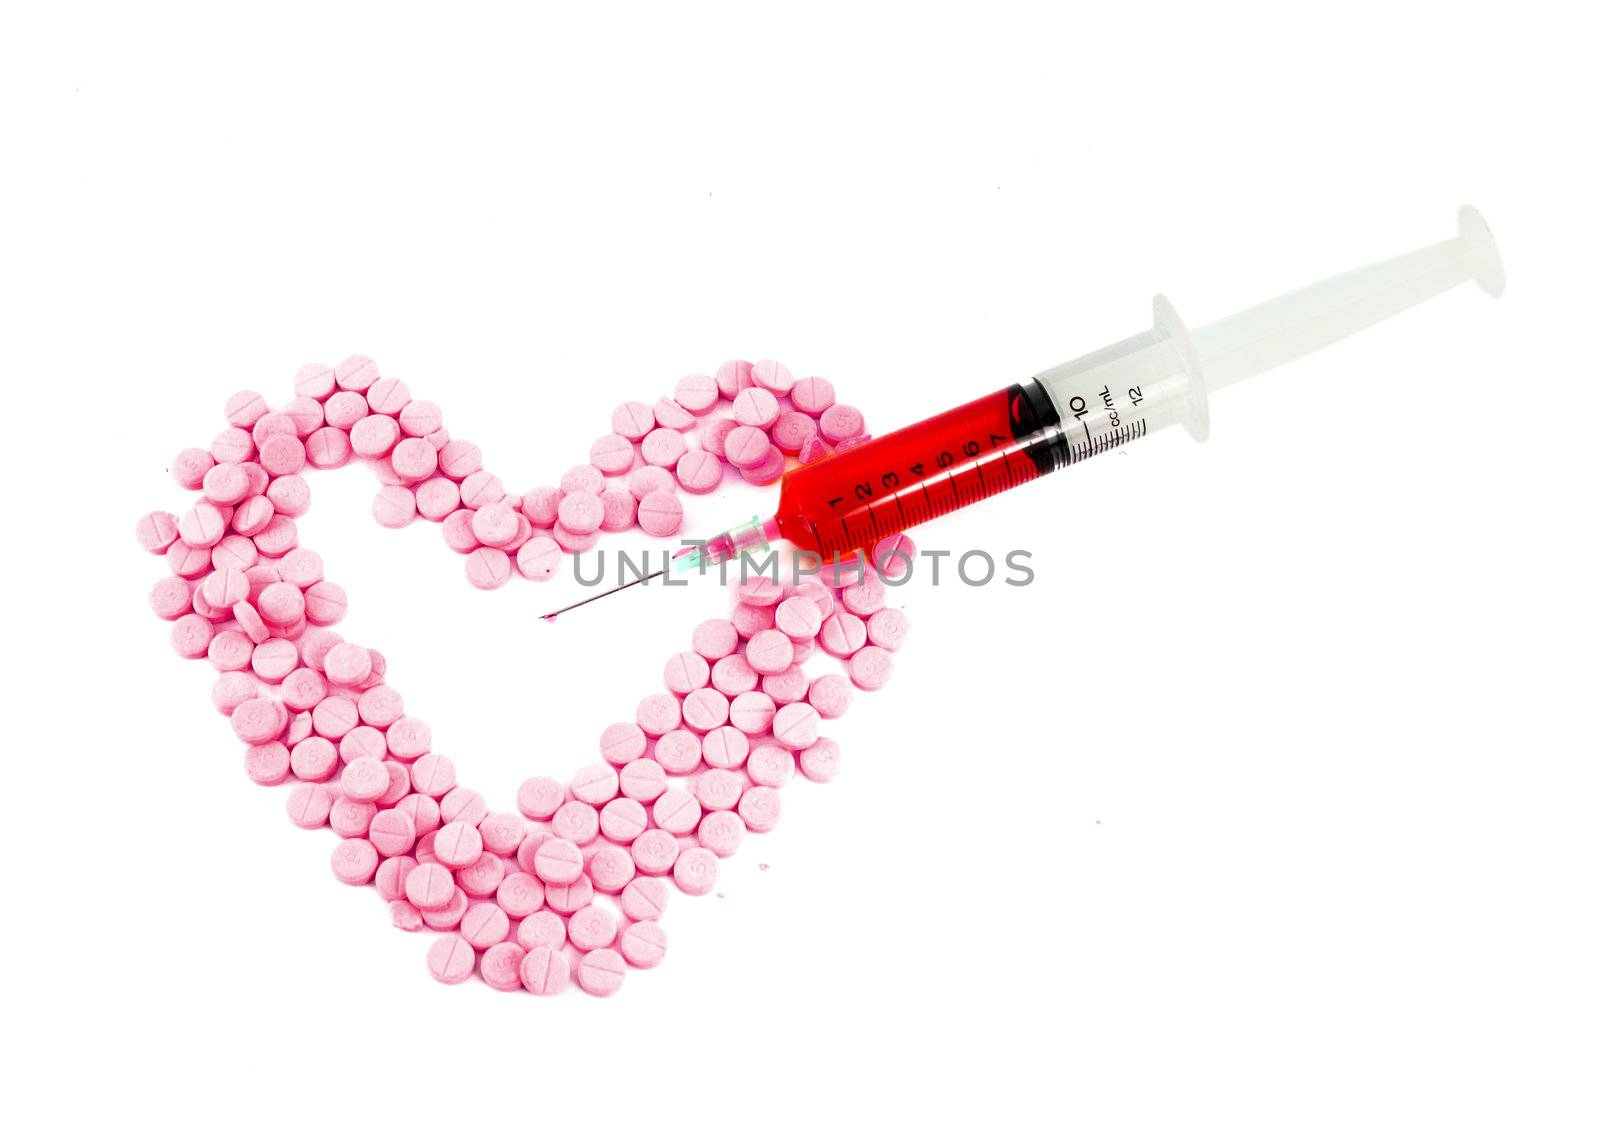 Syringe and pink pills form heart shape isolated on white backgr by geargodz